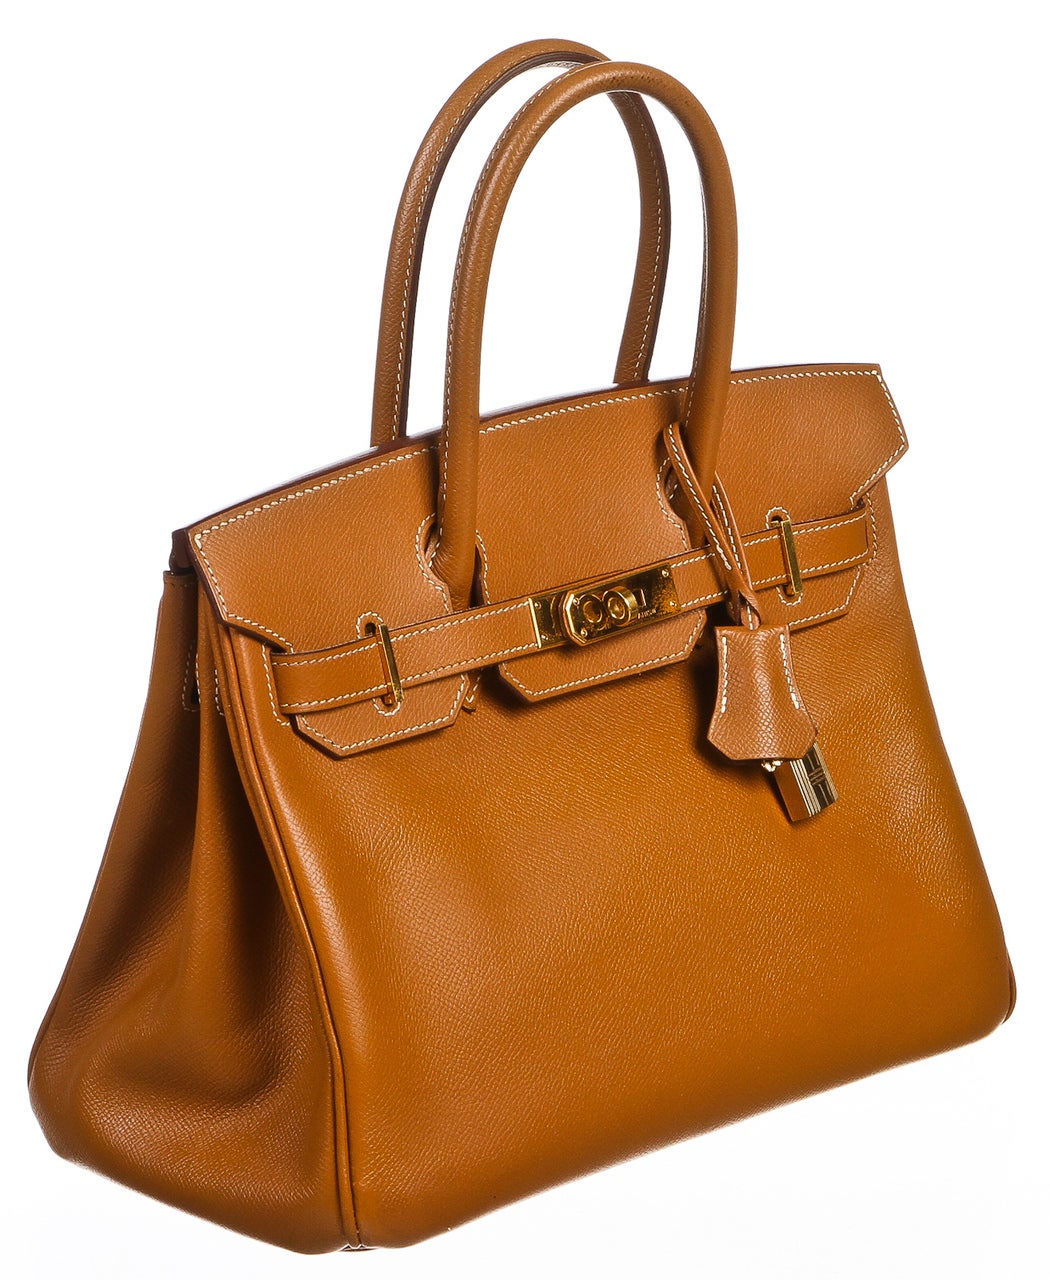 This exquisite satchel is one of the most sought after and most difficult to get handbags in the world. This is an 